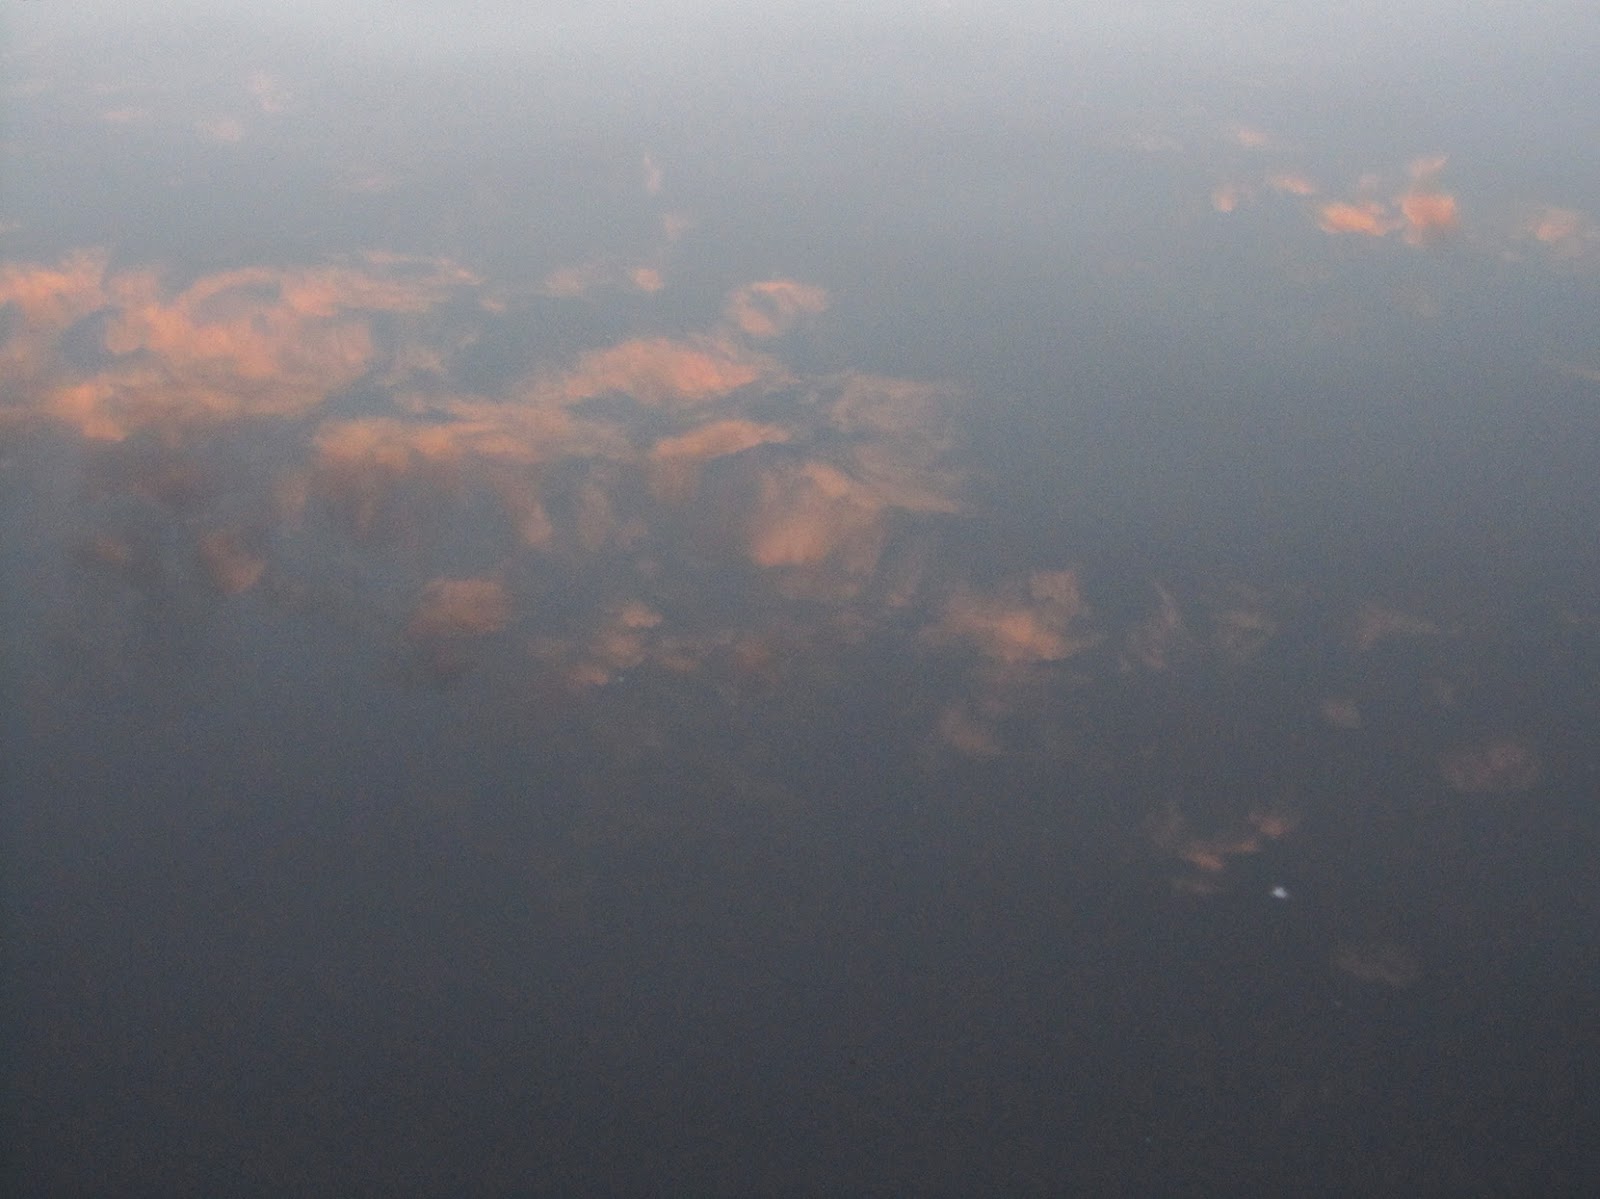 reflection of pink clouds in water